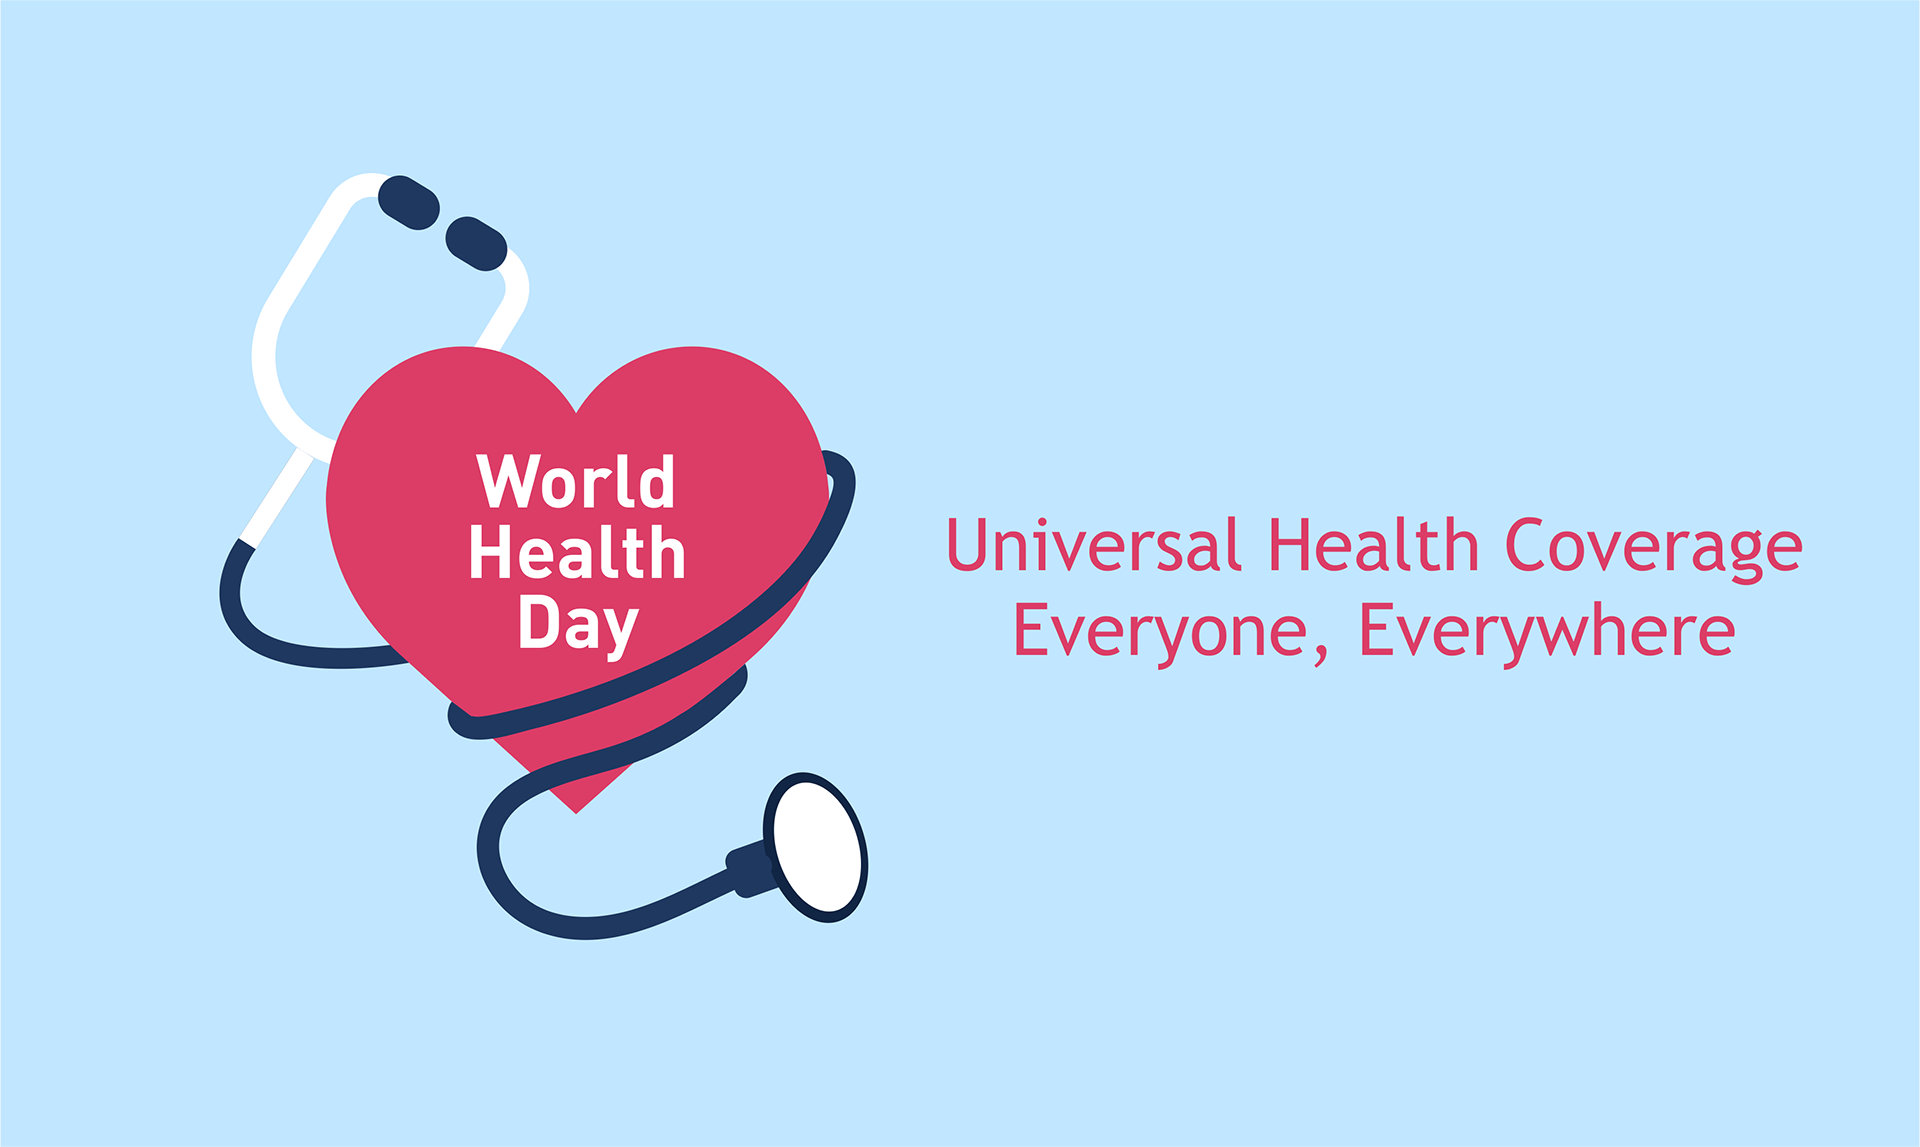 Achieving Universal Health Coverage in India